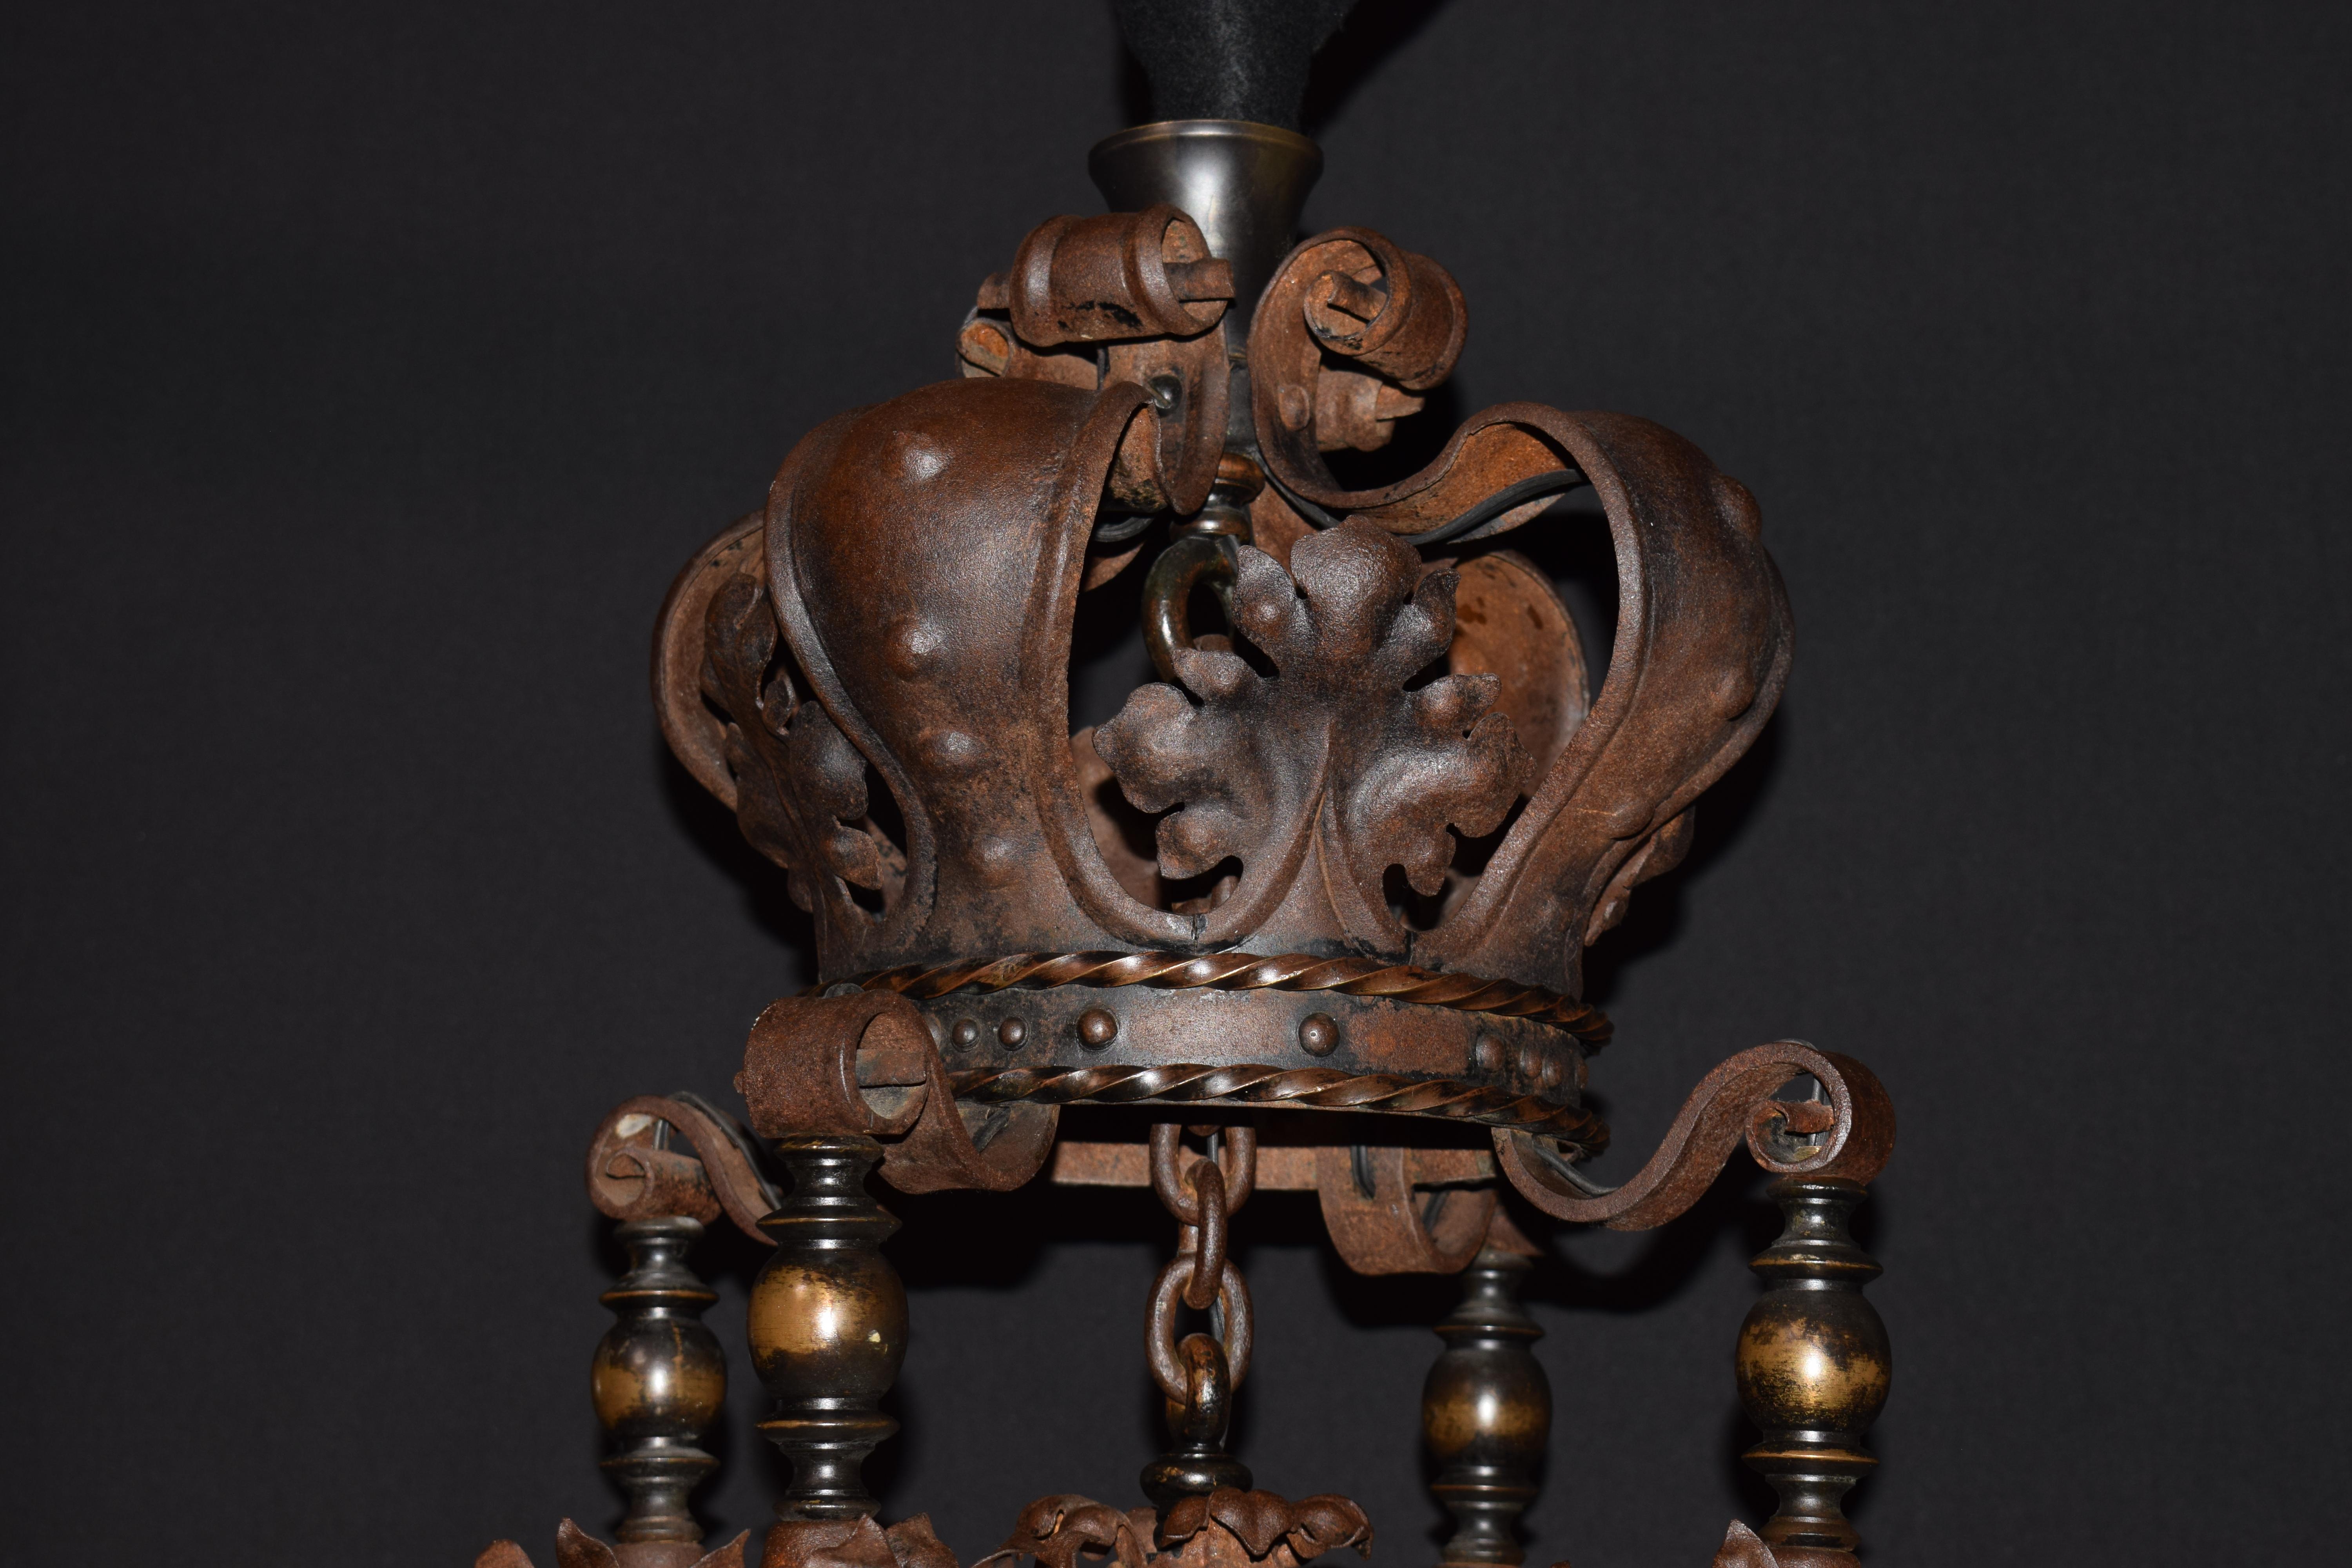 A very Fine Art Nouveau chandelier. Exquisite bronze work. Art glass globe and shades.

Dimensions:
H 30.5